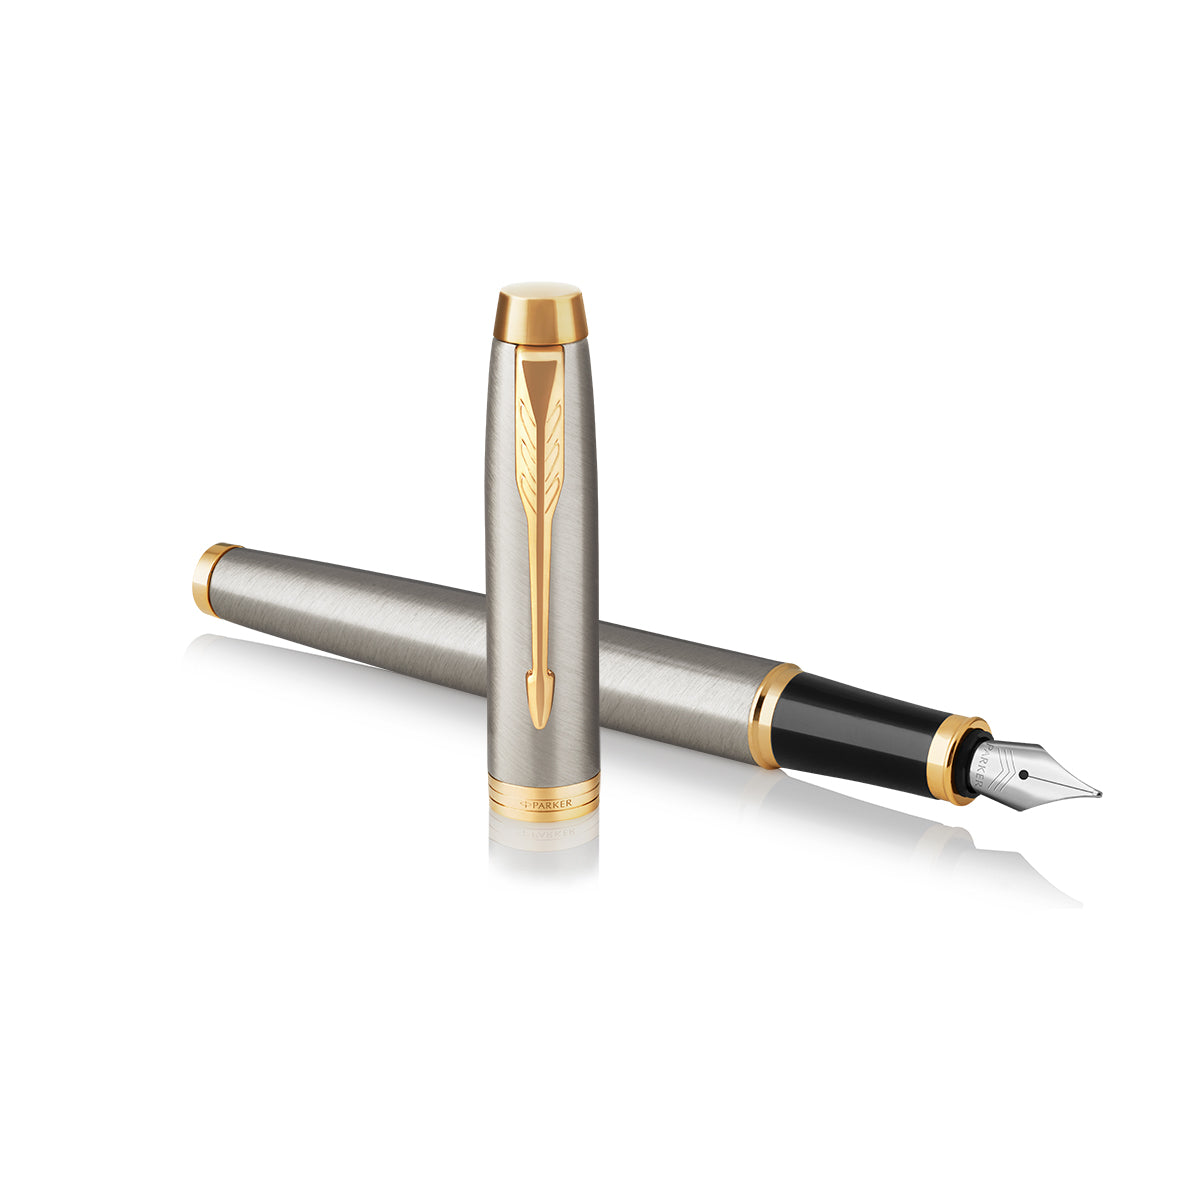 Pre Owned Parker IM Fountain Pen - Fine - Brushed Stainless Steel Gold Trim  Parker Fountain Pens